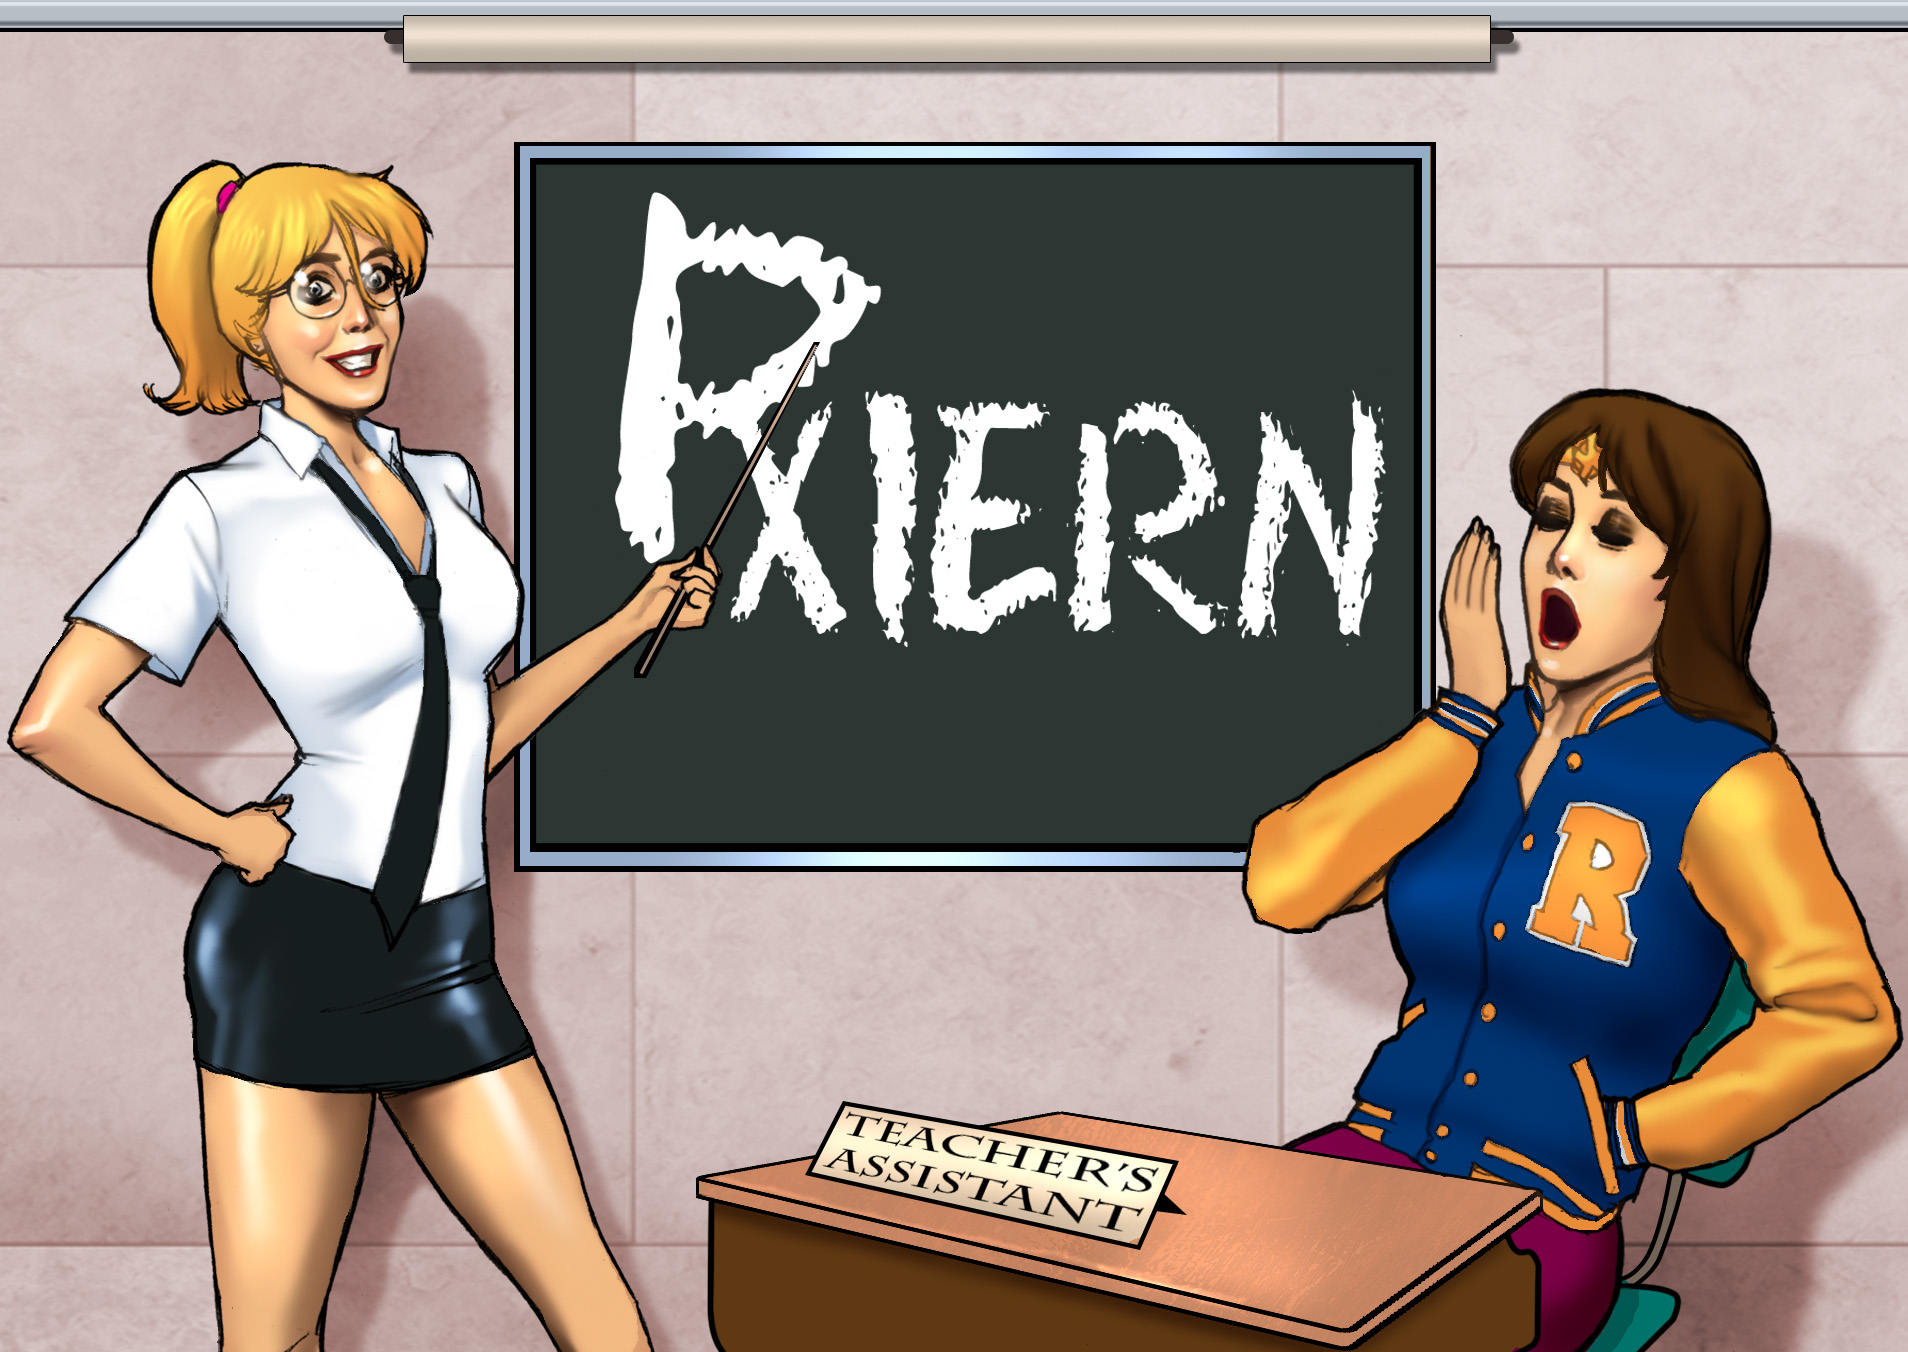 Welcome to Rxiern! – The Exiern Health and Lifestyle Blog